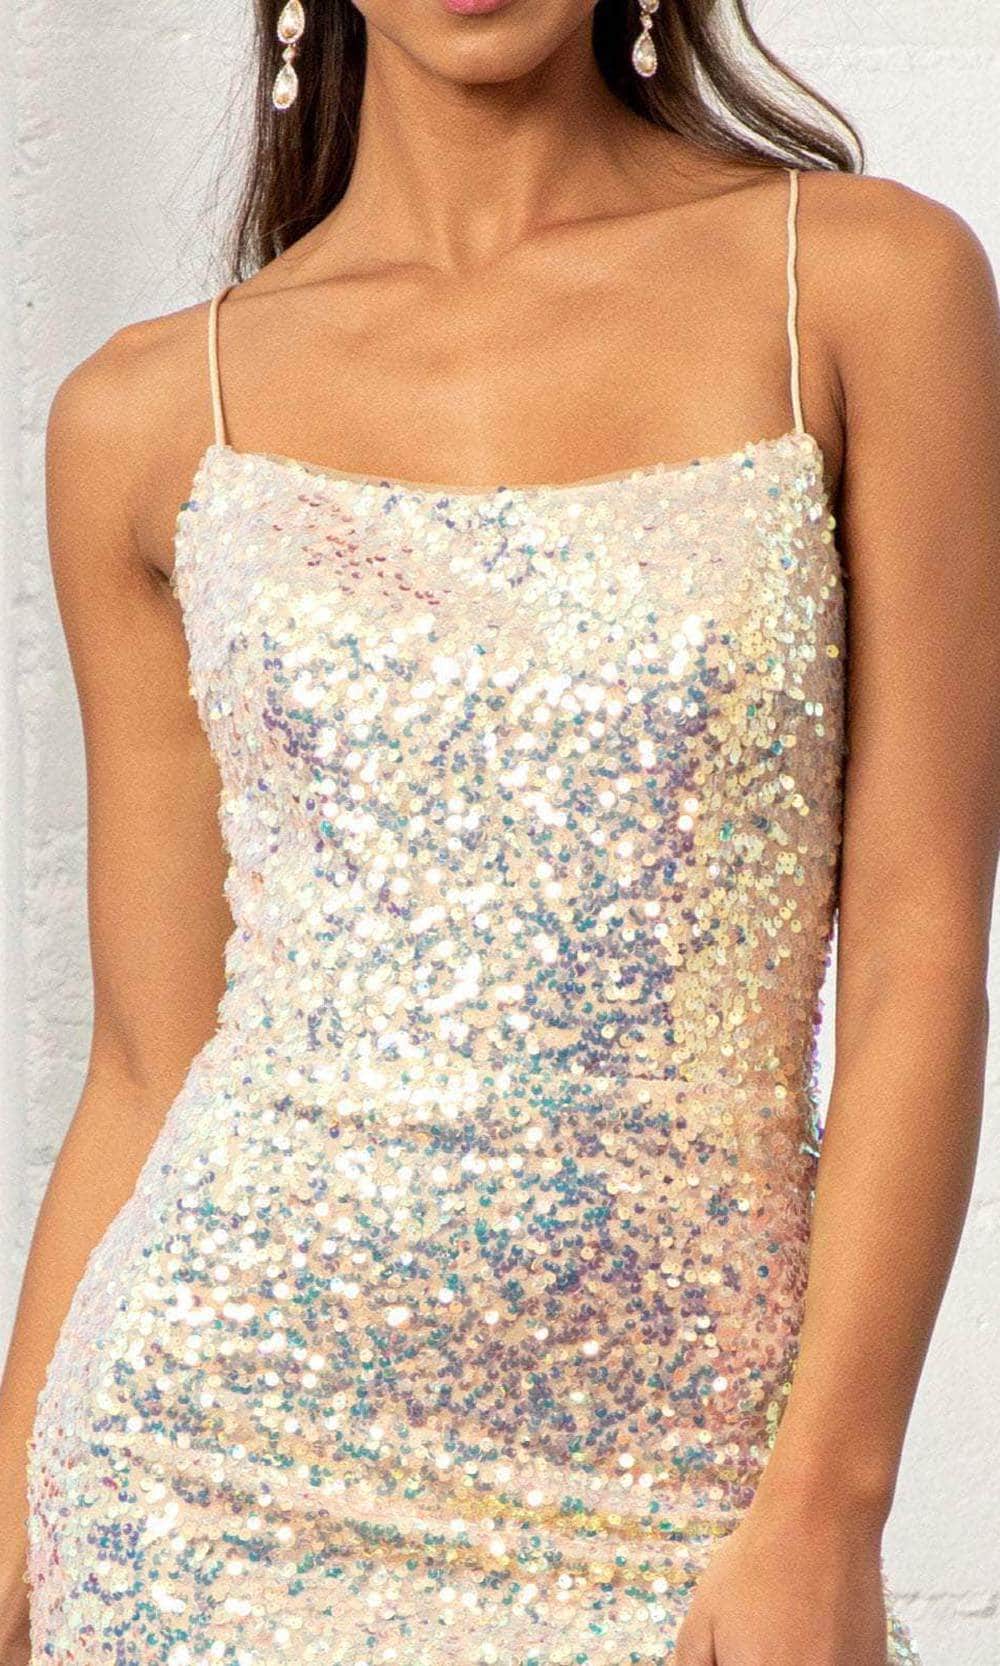 Elizabeth K GL3051 - Sleeveless Sequined Evening Gown Special Occasion Dress